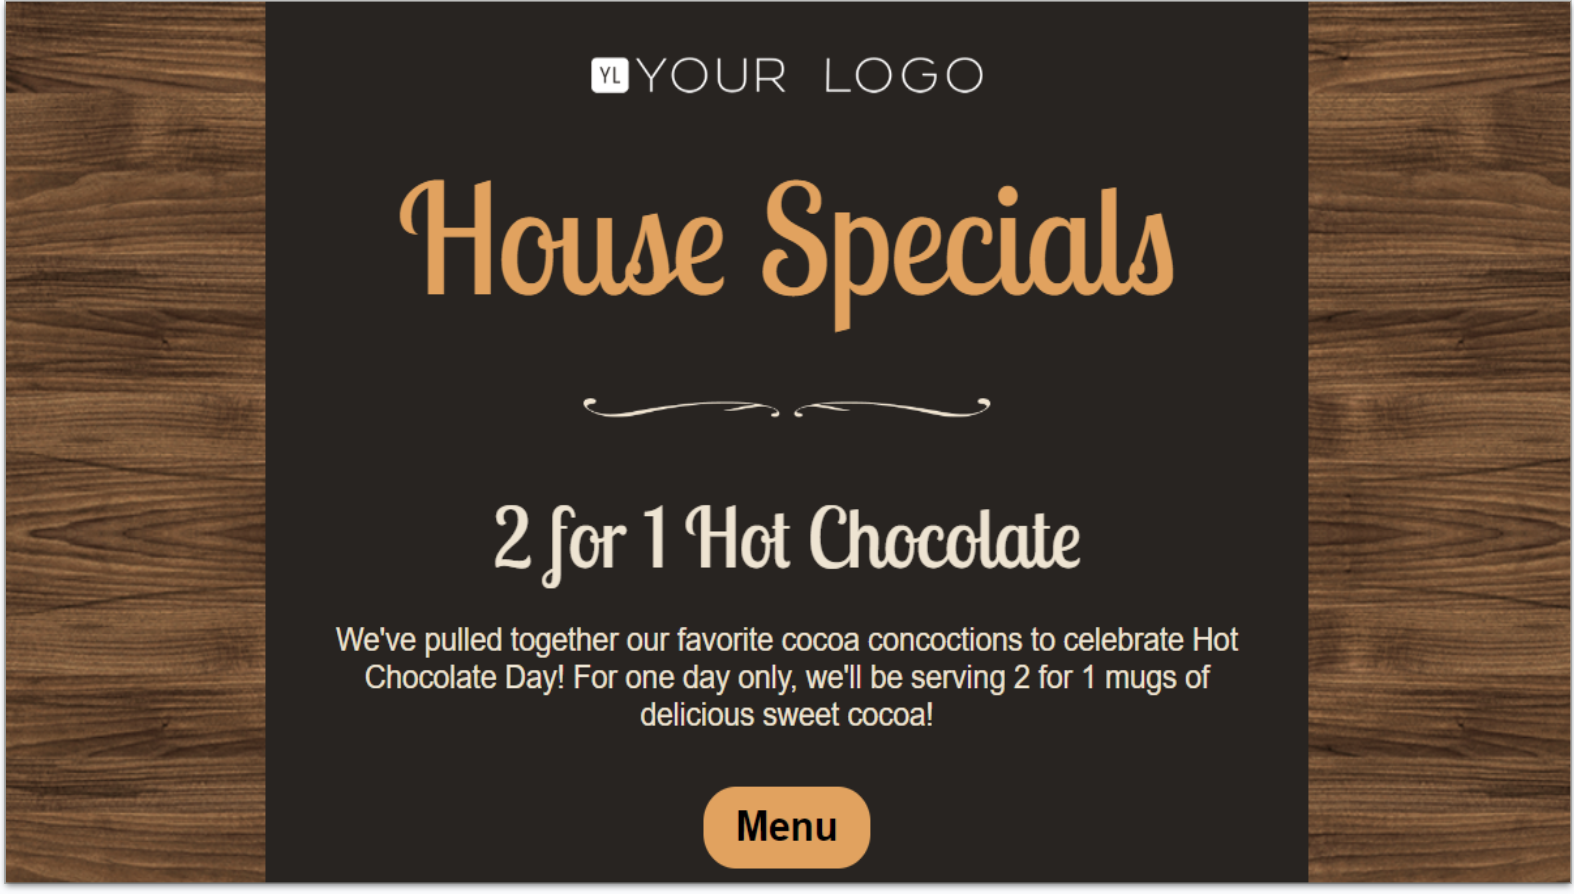 The Hot Chocolate Day Promo email template from Constant Contact